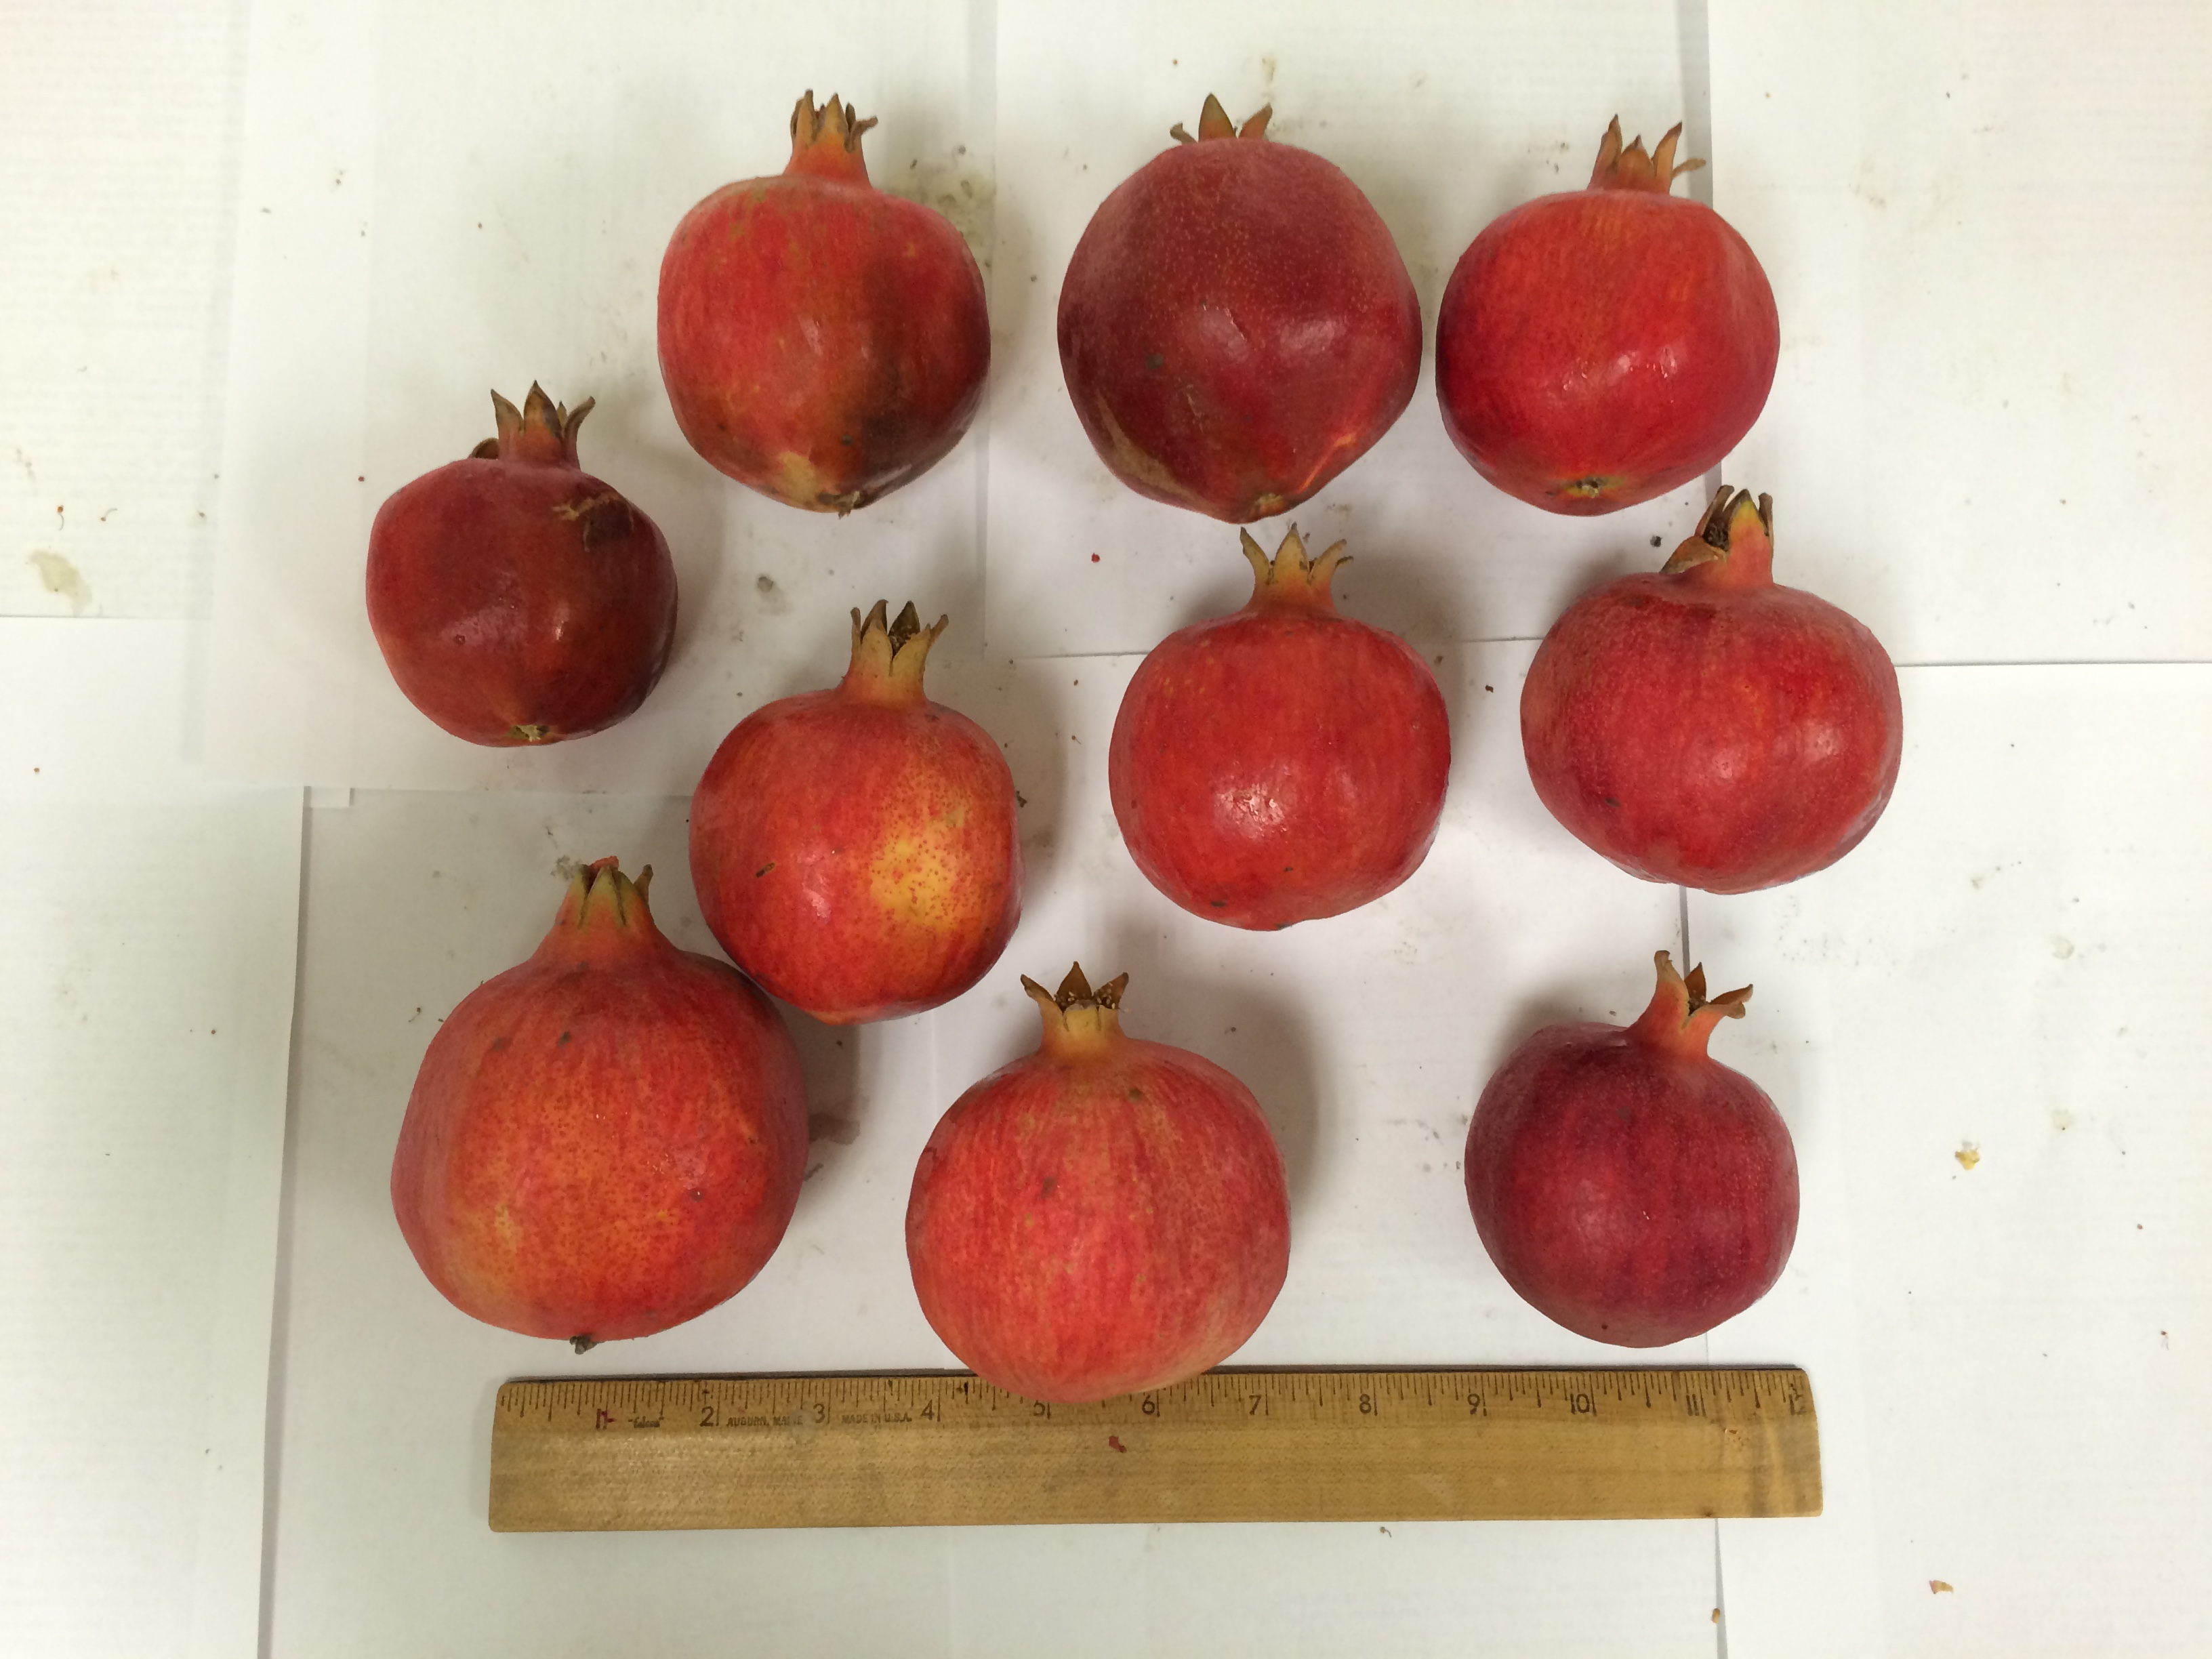 These pomegranates are about an inch smaller than the typical size, but they're packed with antioxidents.